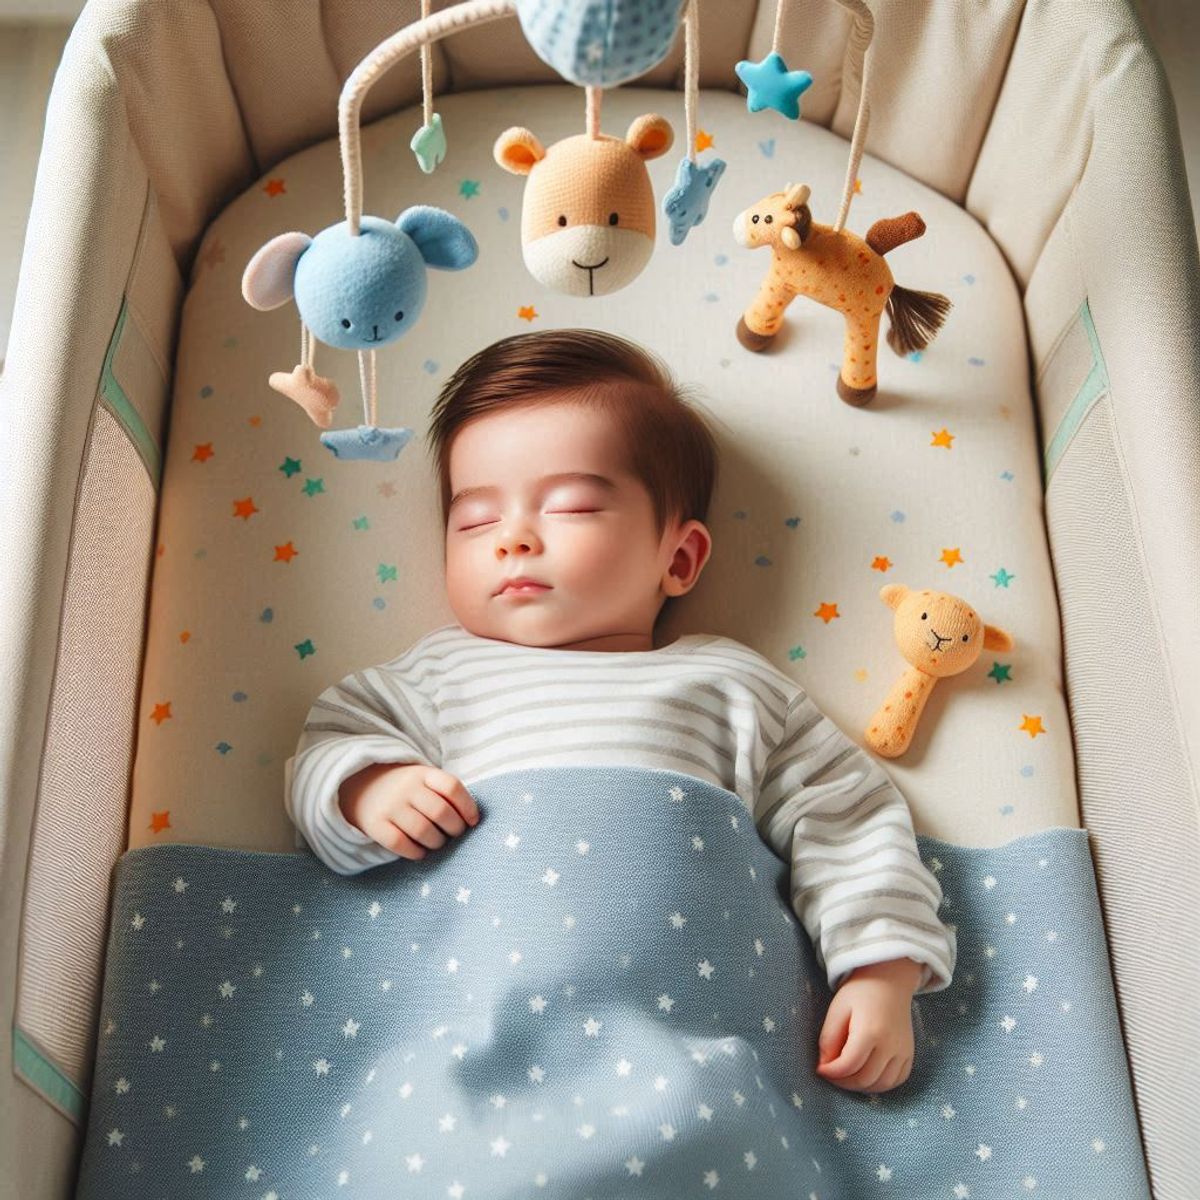 Baby Cot & Baby Swing: The Difference and Importance of Both